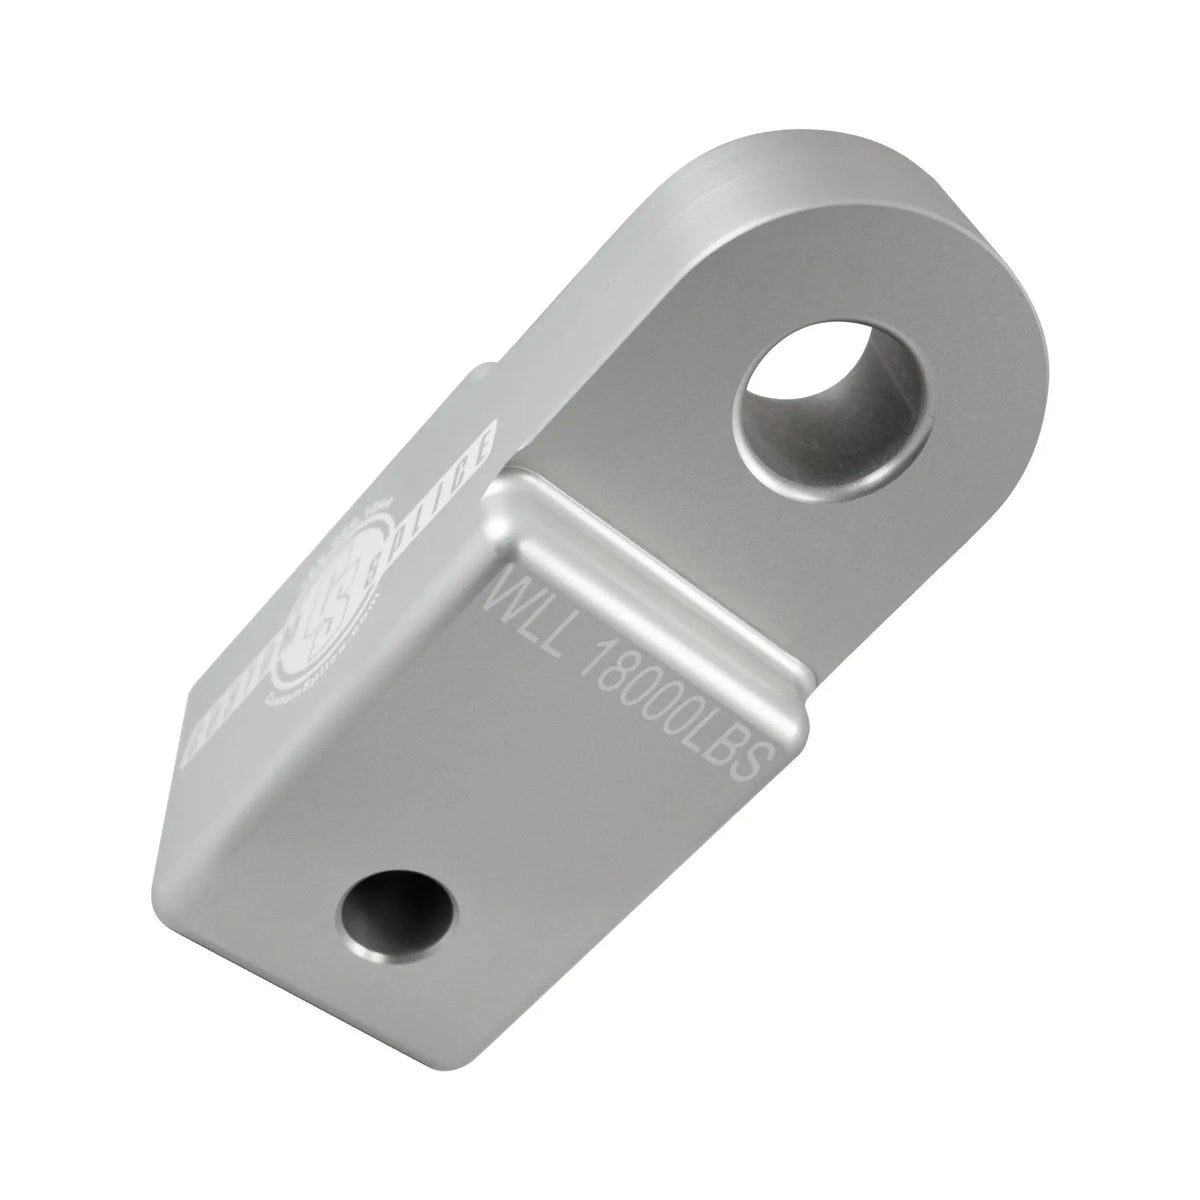 Silver 2 1/2" Hitch Receiver Shackle Adapter - Bottom View for Profile and Weight Load Limit.